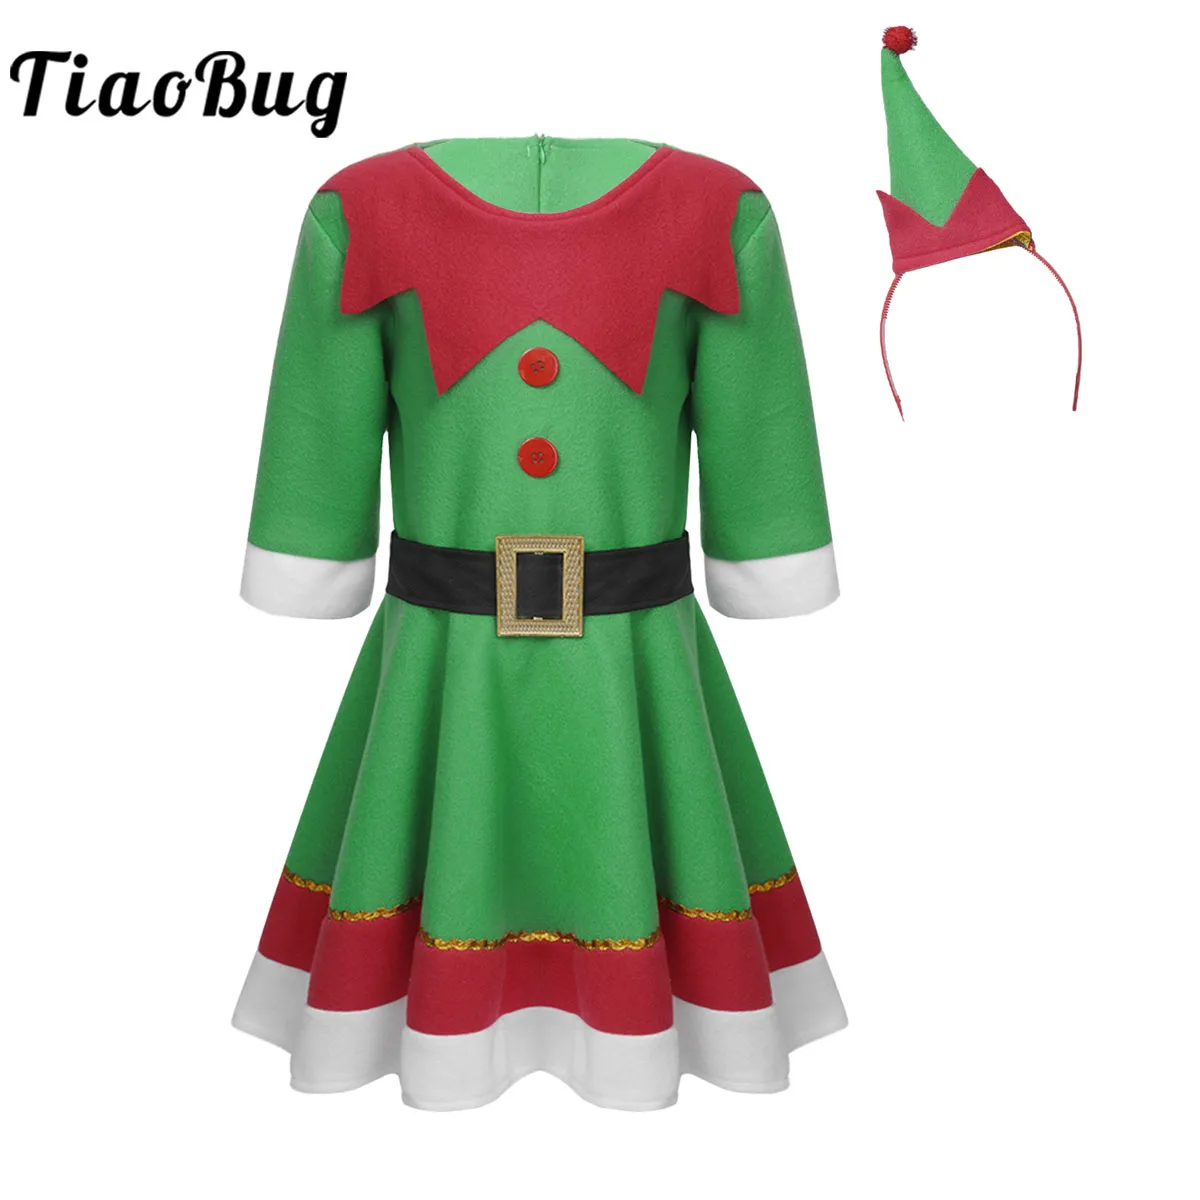 

Children Girls Christmas Elf Dress Festival Mrs Santa Claus Cosplay Costumes Sets Fairy Xmas Party Fancy Dress with Hat Green